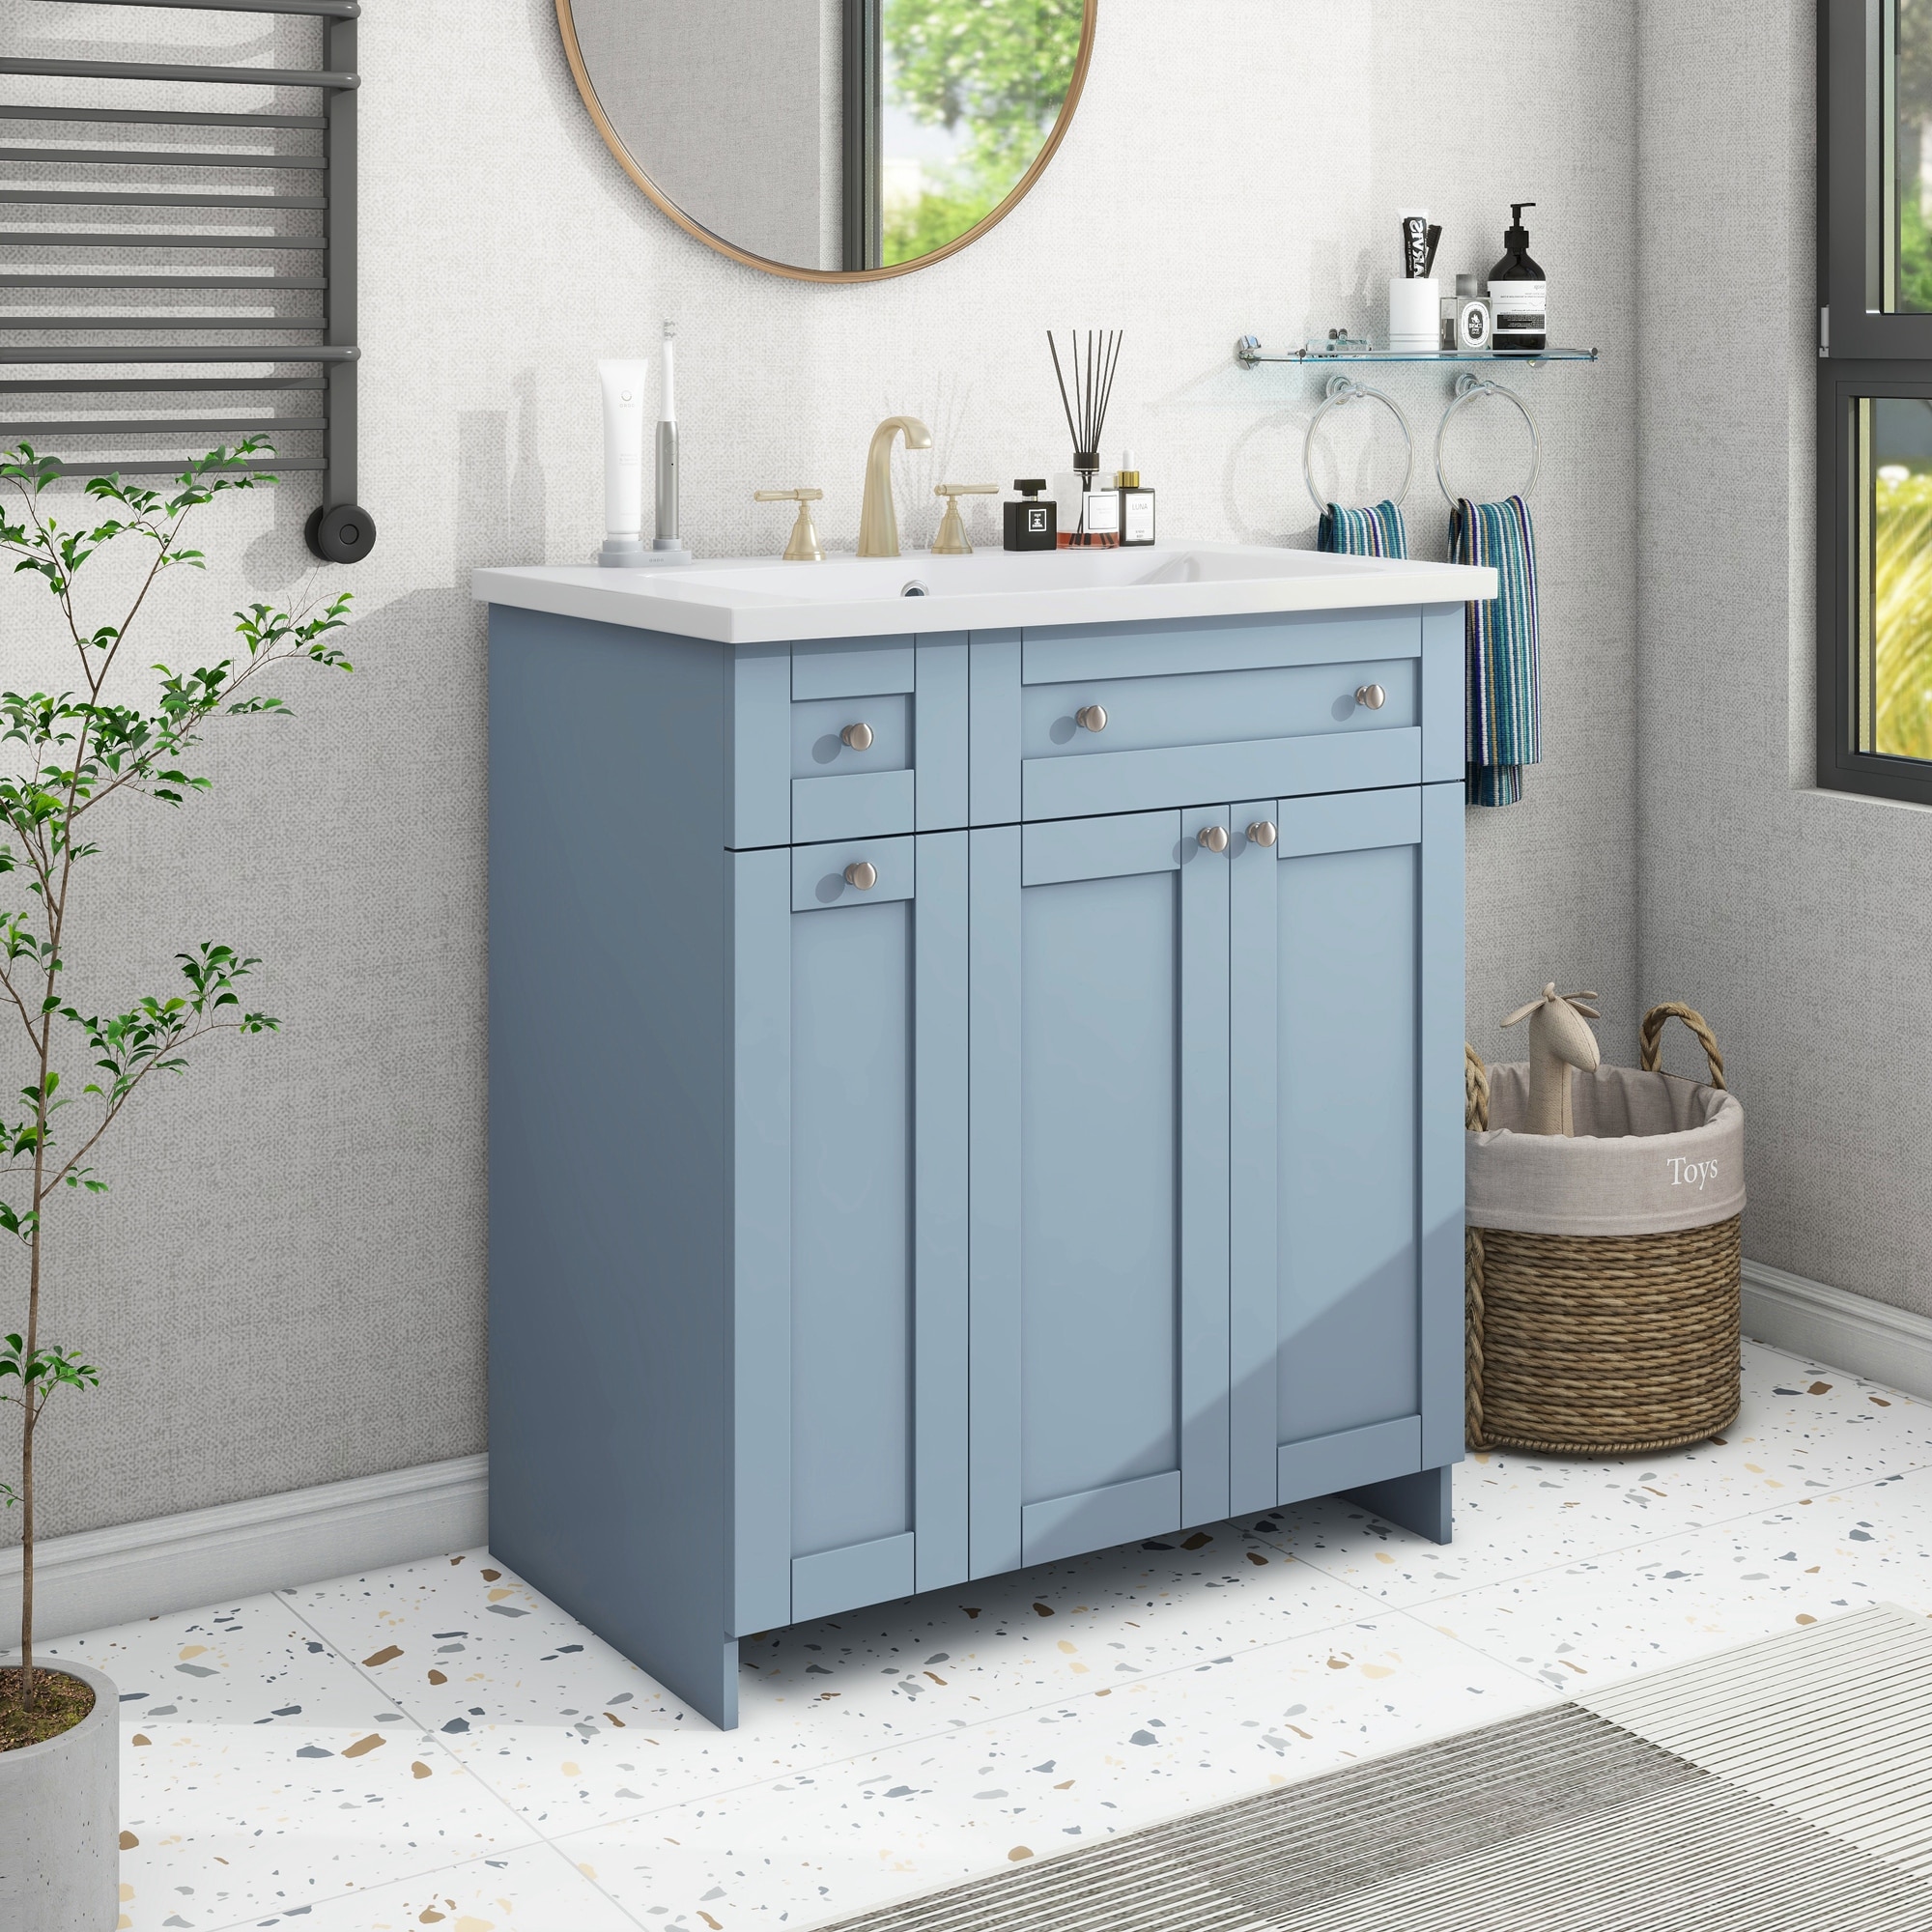 https://ak1.ostkcdn.com/images/products/is/images/direct/adf0c90117d3a4dabd8ff4ce966b0383e25f4916/Modern-Single-Floor-Bathroom-Cabinet-Set-with-Sink-Combo%2C30%22-Bathroom-Vanity-with-Single-Sink-Wood-Storage-Drawer.jpg